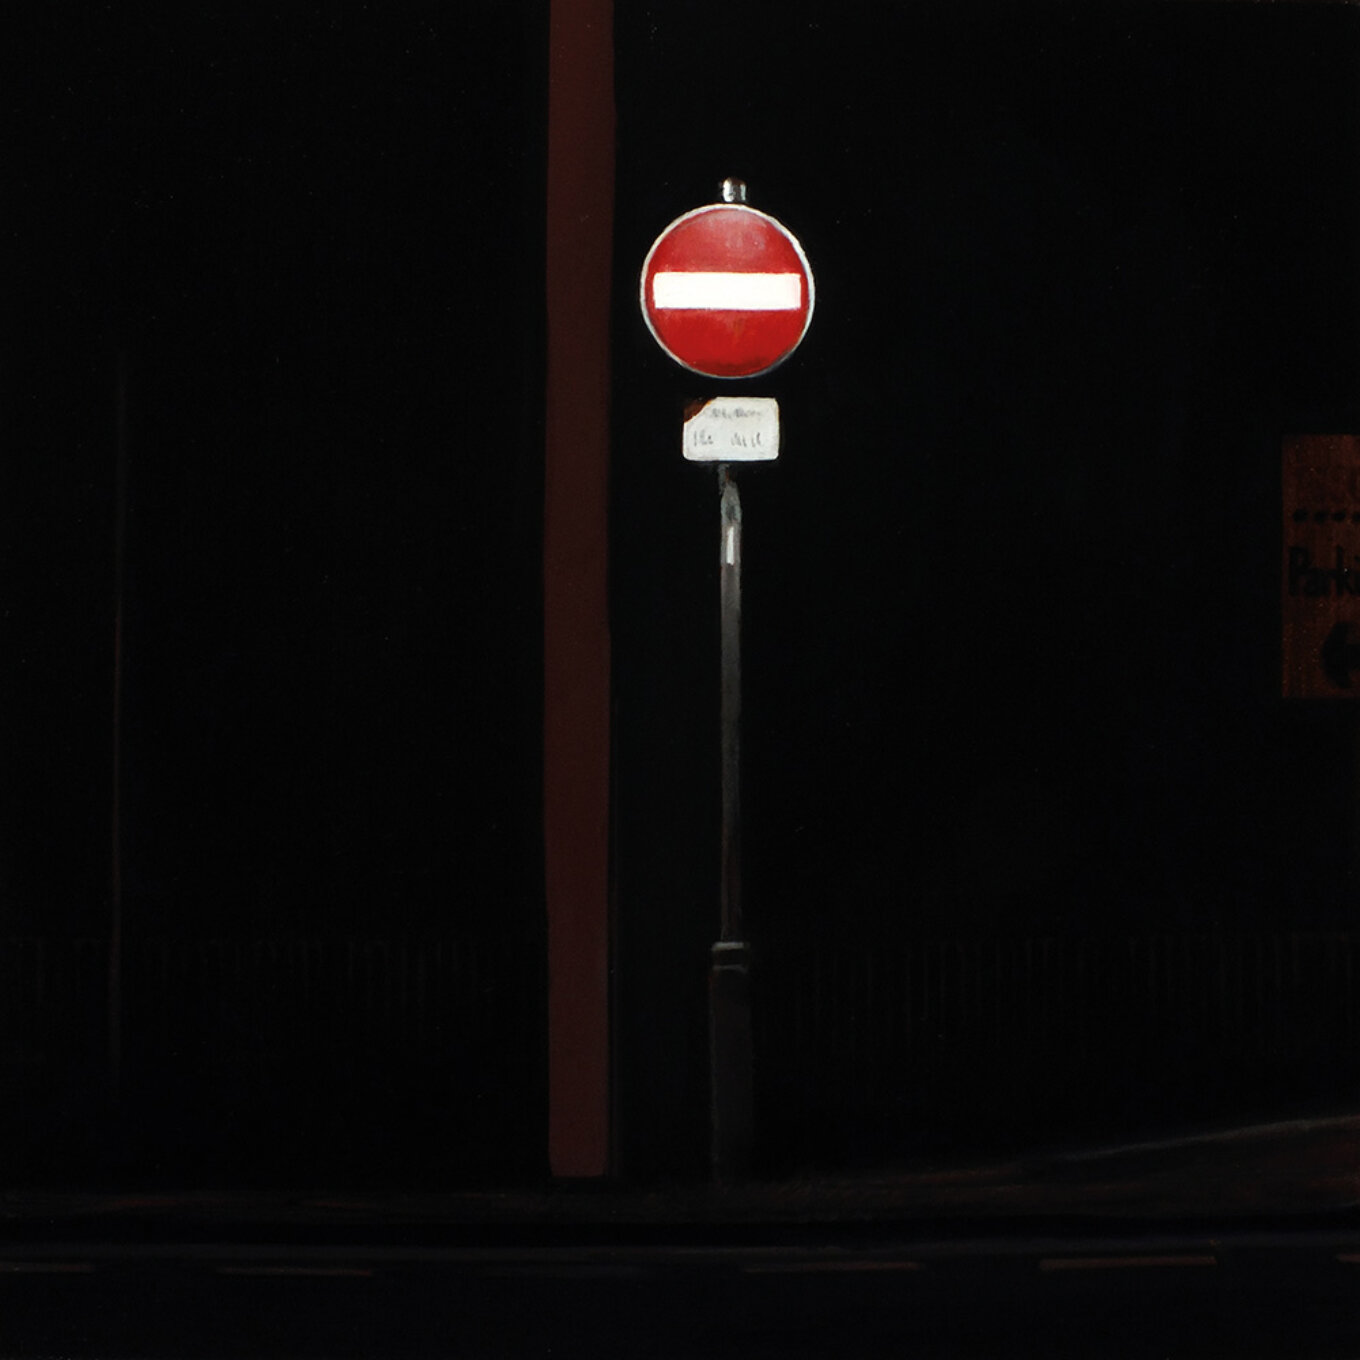 17 Andy Cropper No Entry2018 Abbeydale Road South Acrylic And Oil On Panel25cmx25cm3126x3126px